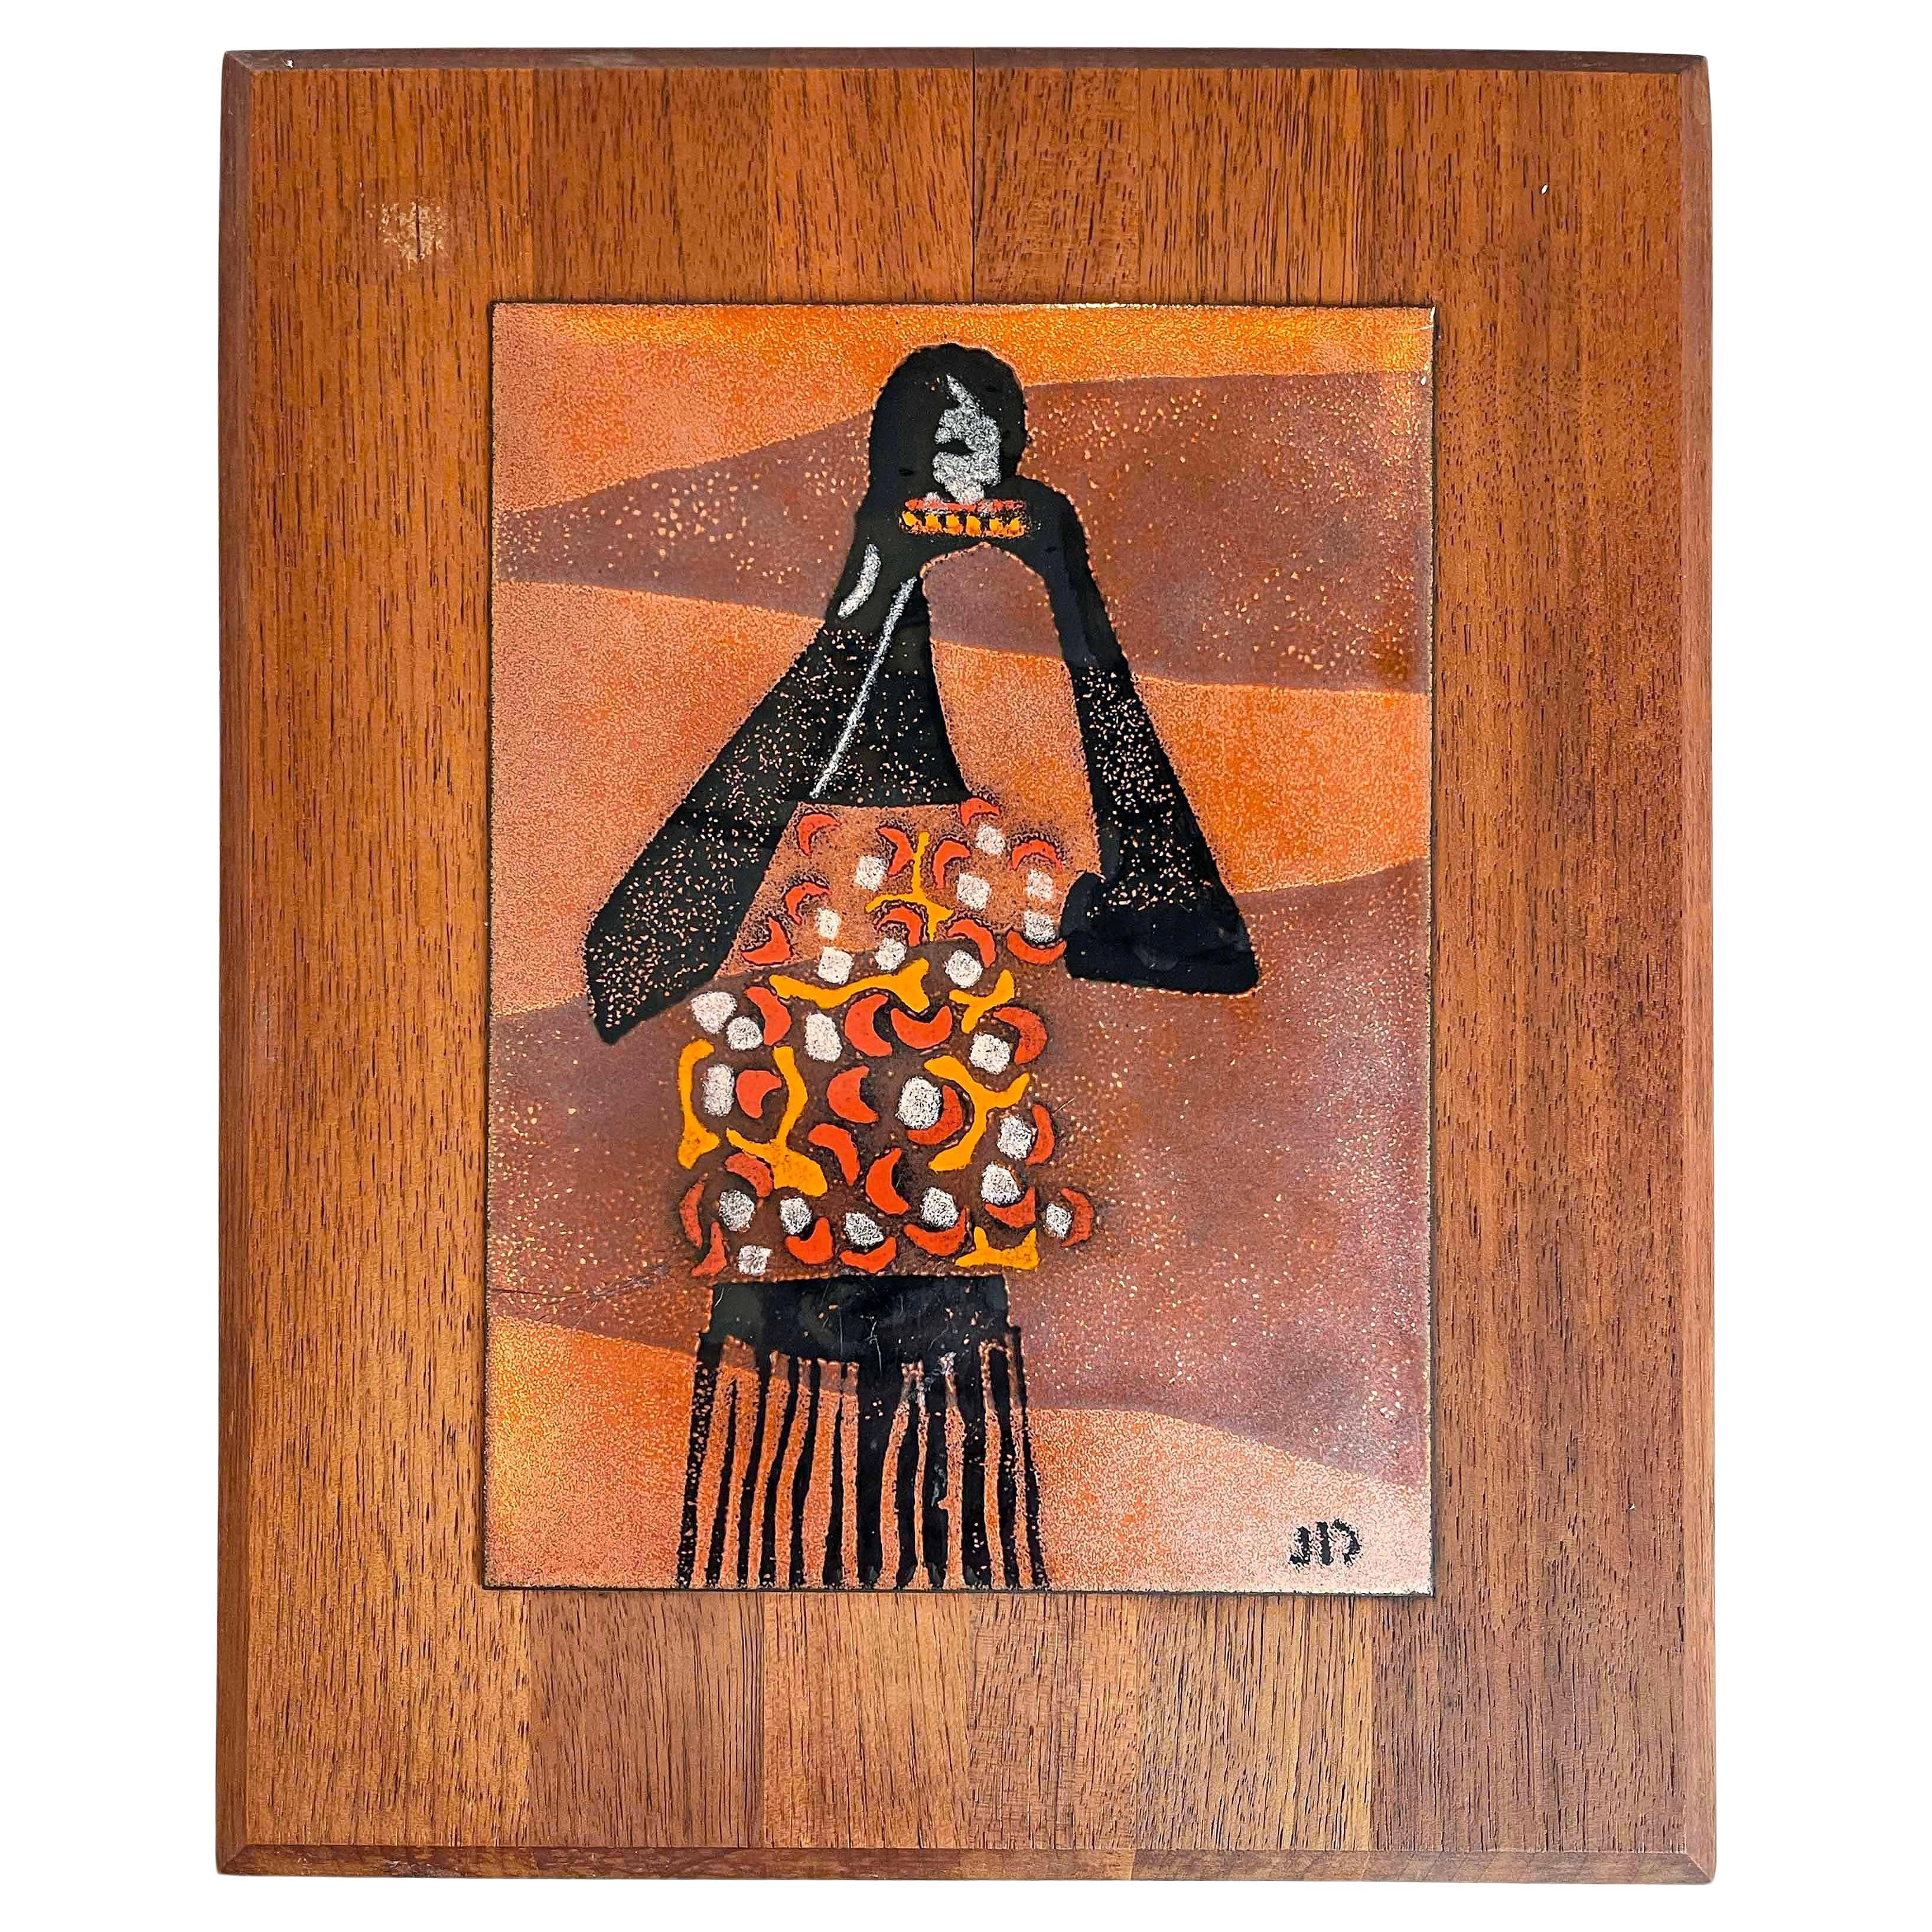 "Playing the Harmonica", Mid Century Enamel Panel of Black Woman in Red & Black For Sale